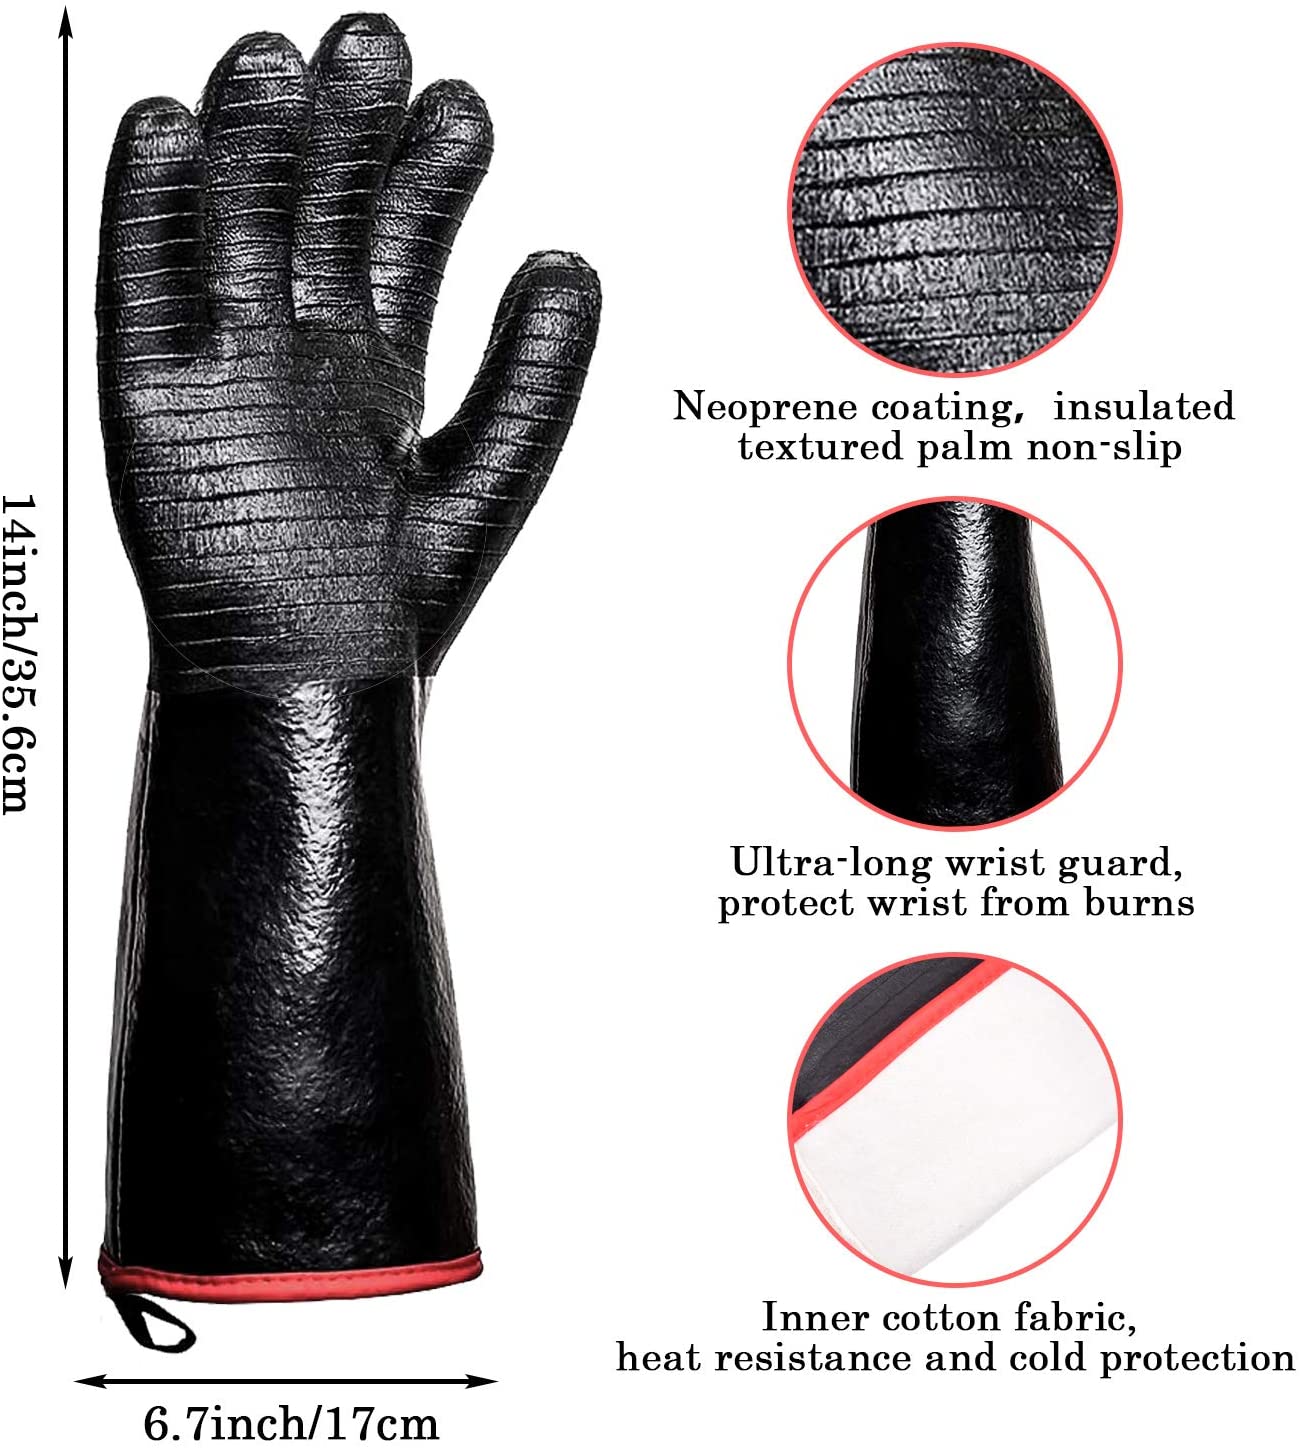 BBQ Oven Gloves 14 Inches,932℉,Heat Resistant-Smoker, Grill, Cooking Barbecue Gloves, for Handling Heat Food Right on Your Fryer,Grill, Waterproof, Fireproof, Oil Resistant Neoprene Coating